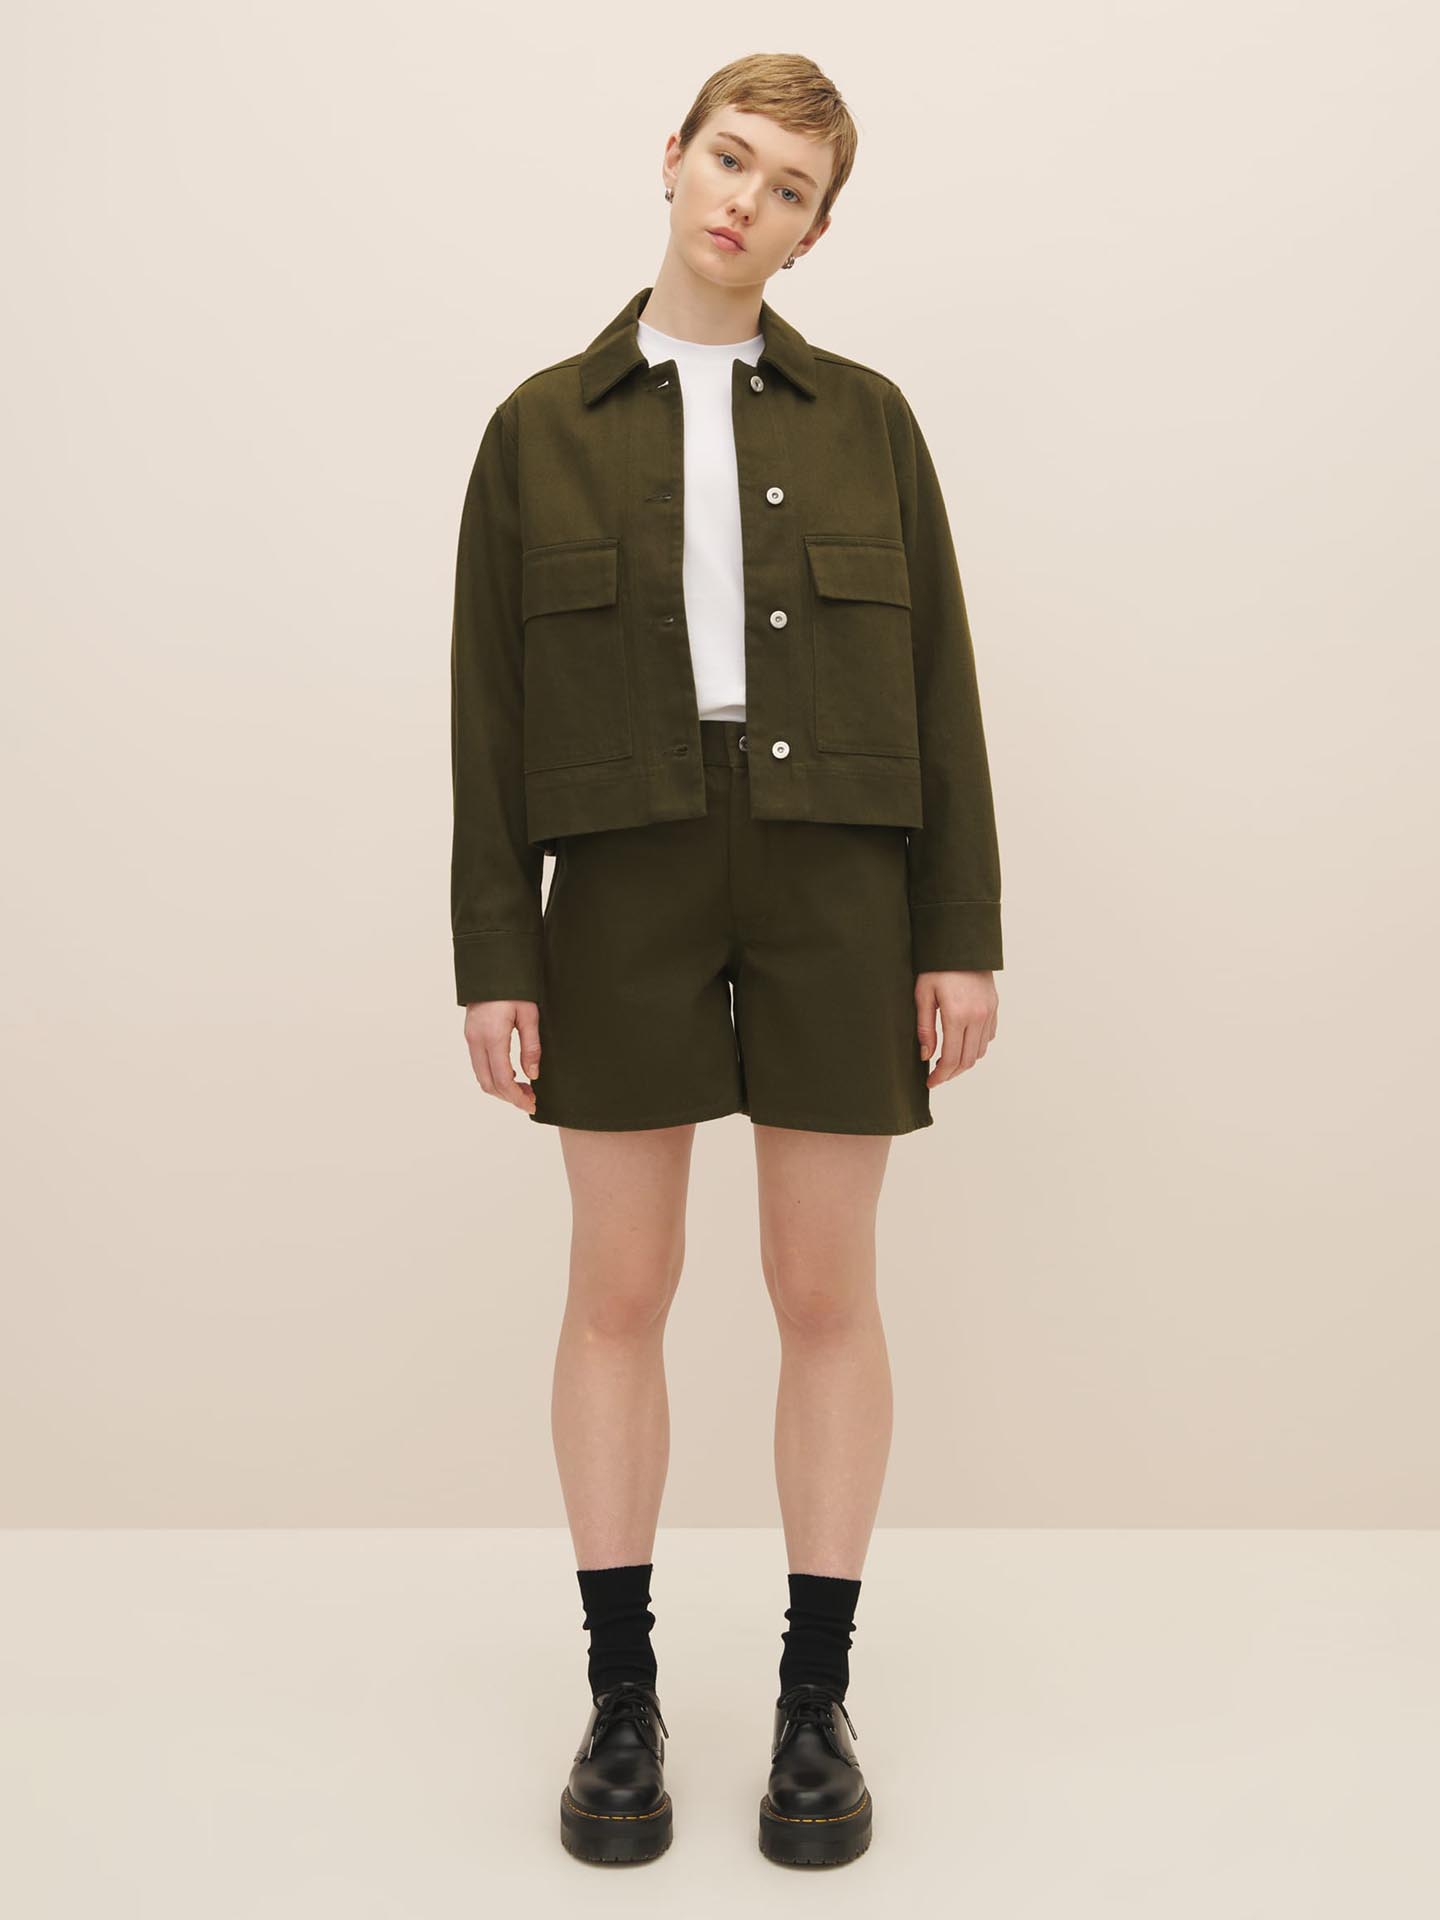 A person posing in a monochrome Mirror Jacket - Khaki Denim ensemble by Kowtow featuring a collared jacket, matching shorts, a white shirt, black socks, and chunky black shoes. For the perfect fit, please consult our size chart.